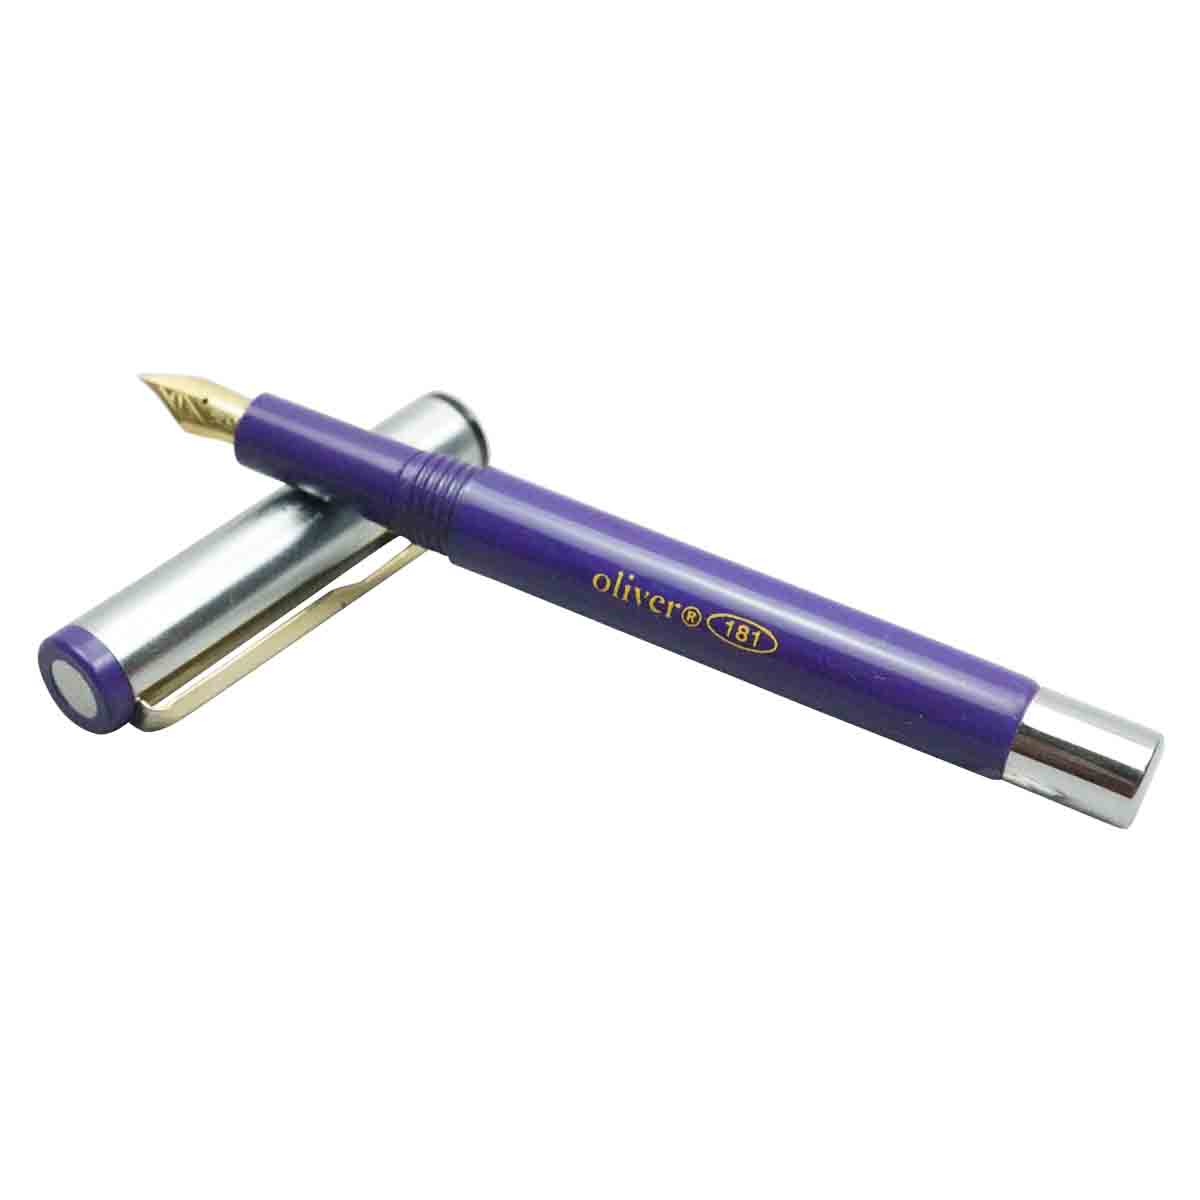 Oliver 181 Silver Cap and Violet Body Fountain Pen Model 18696